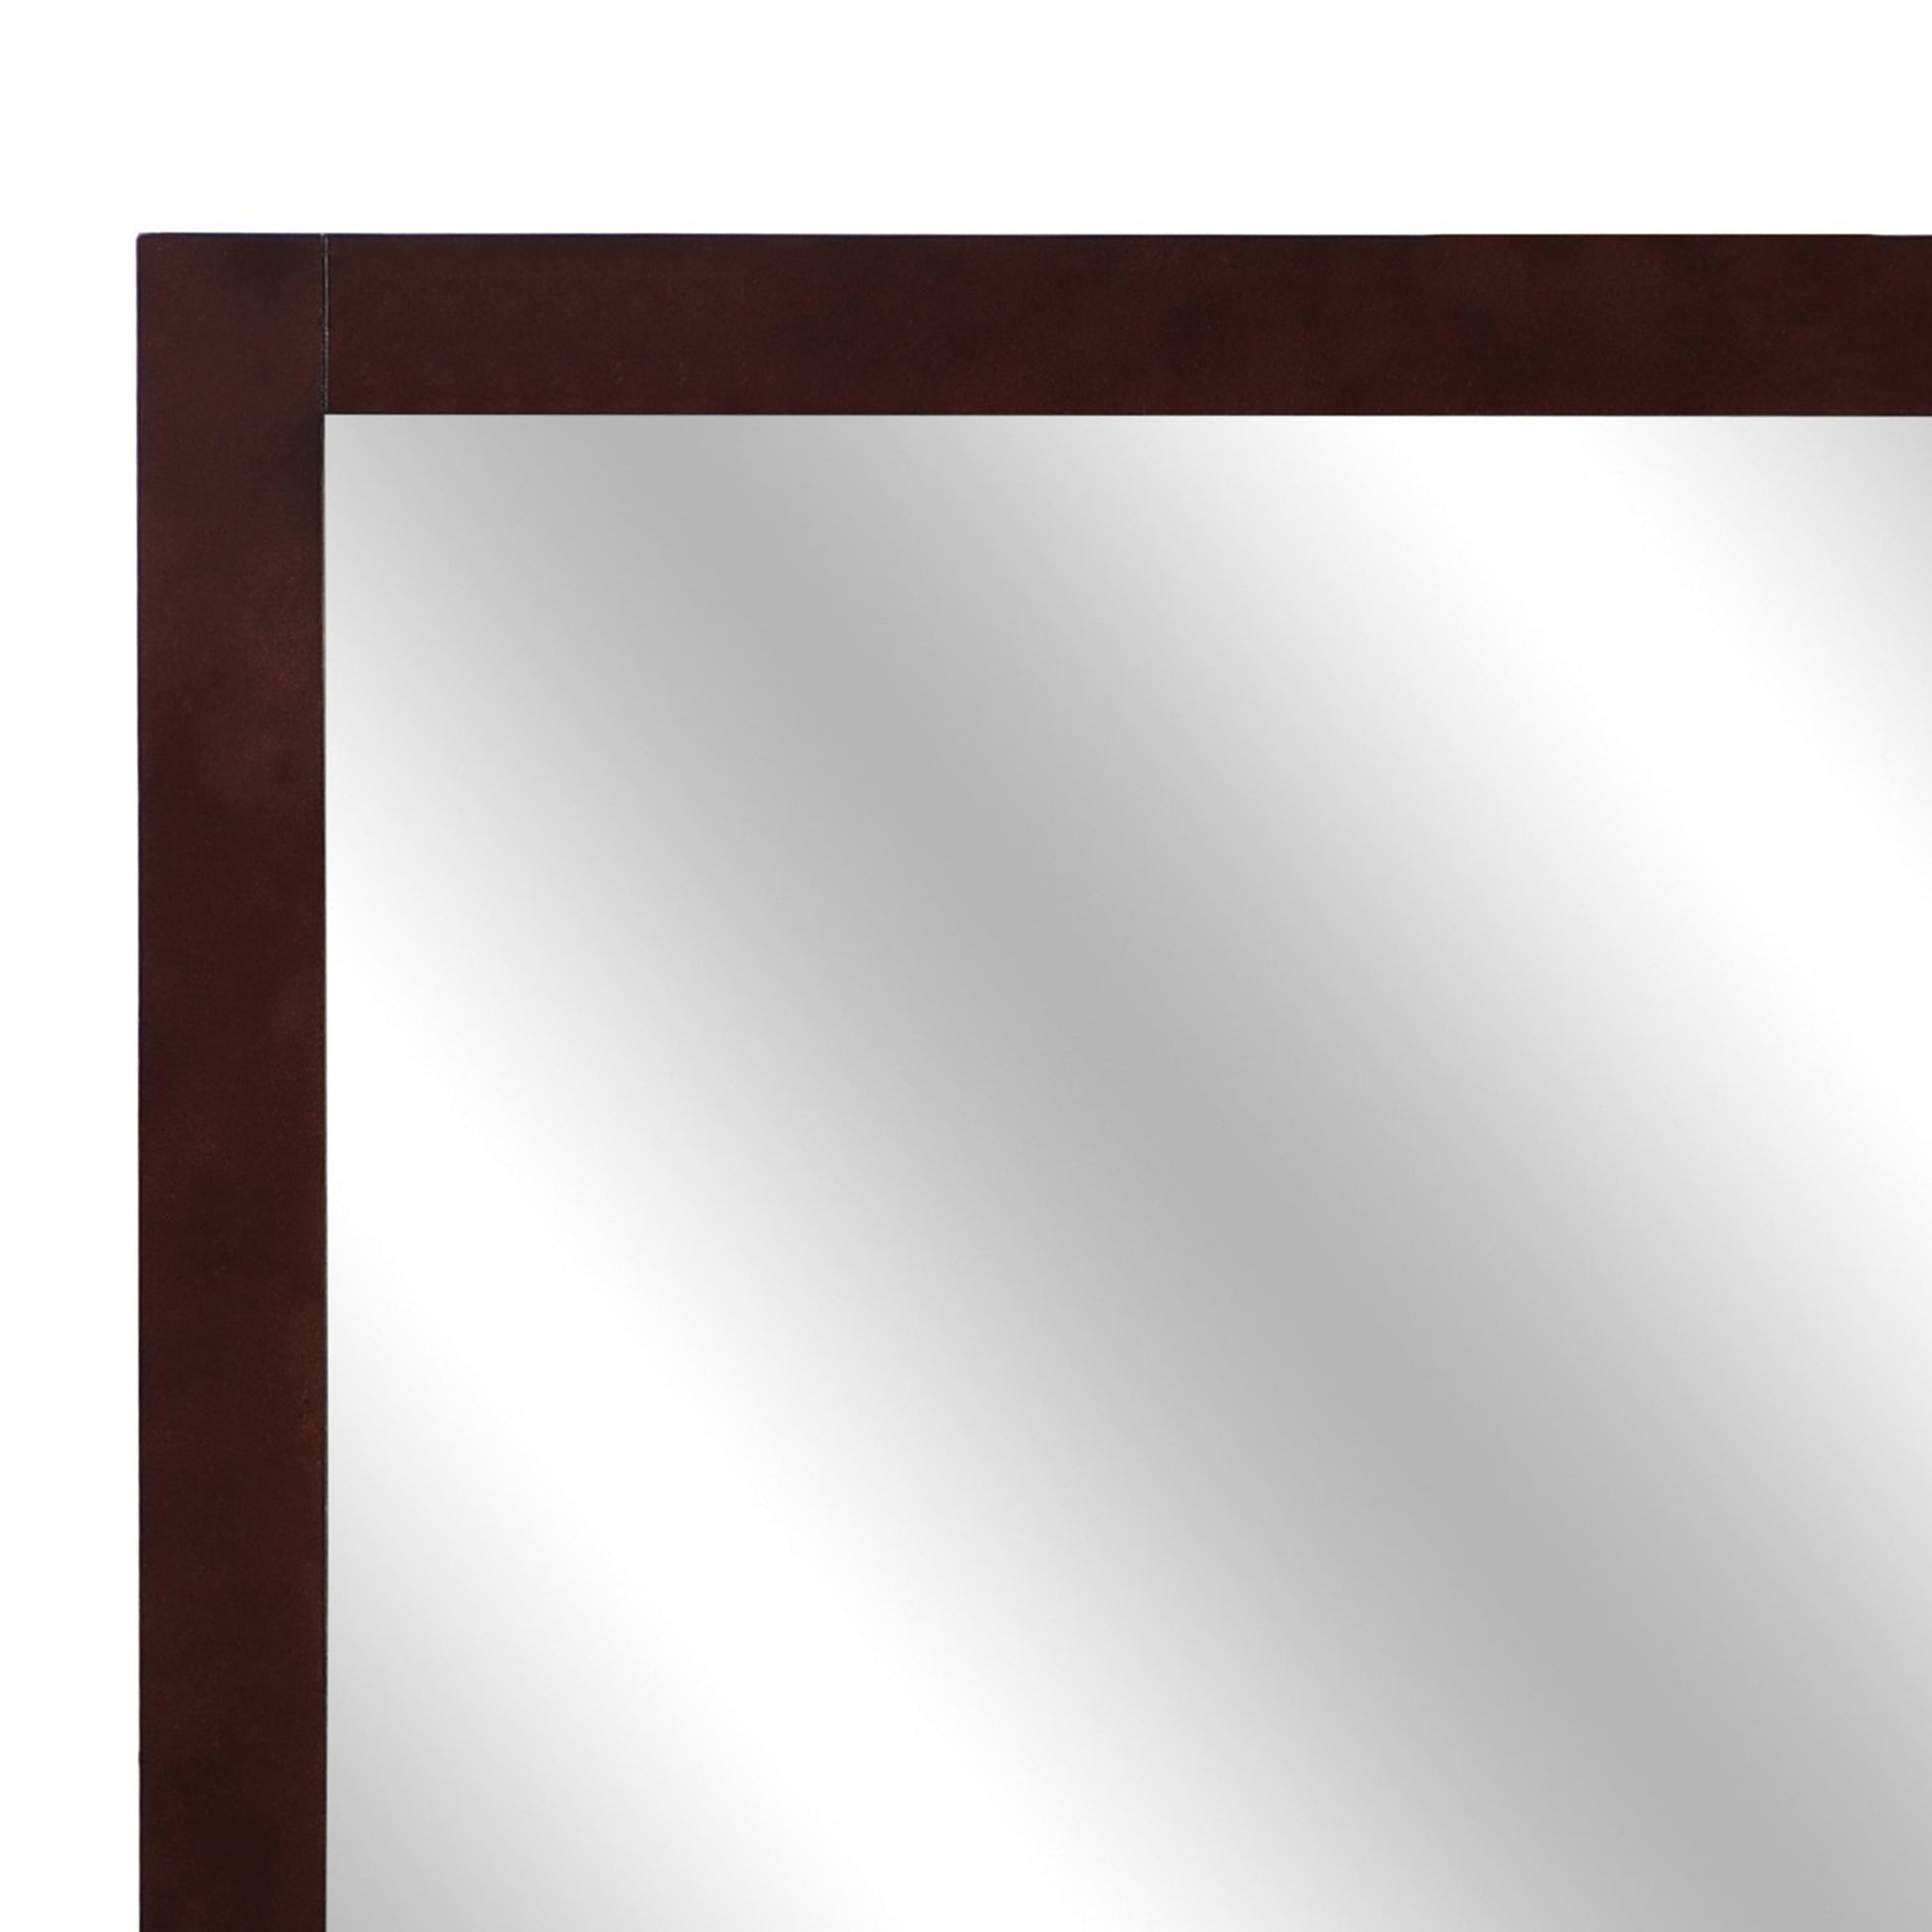 Benzara Cherry Brown Transitional Style Square Mirror Wooden Frame